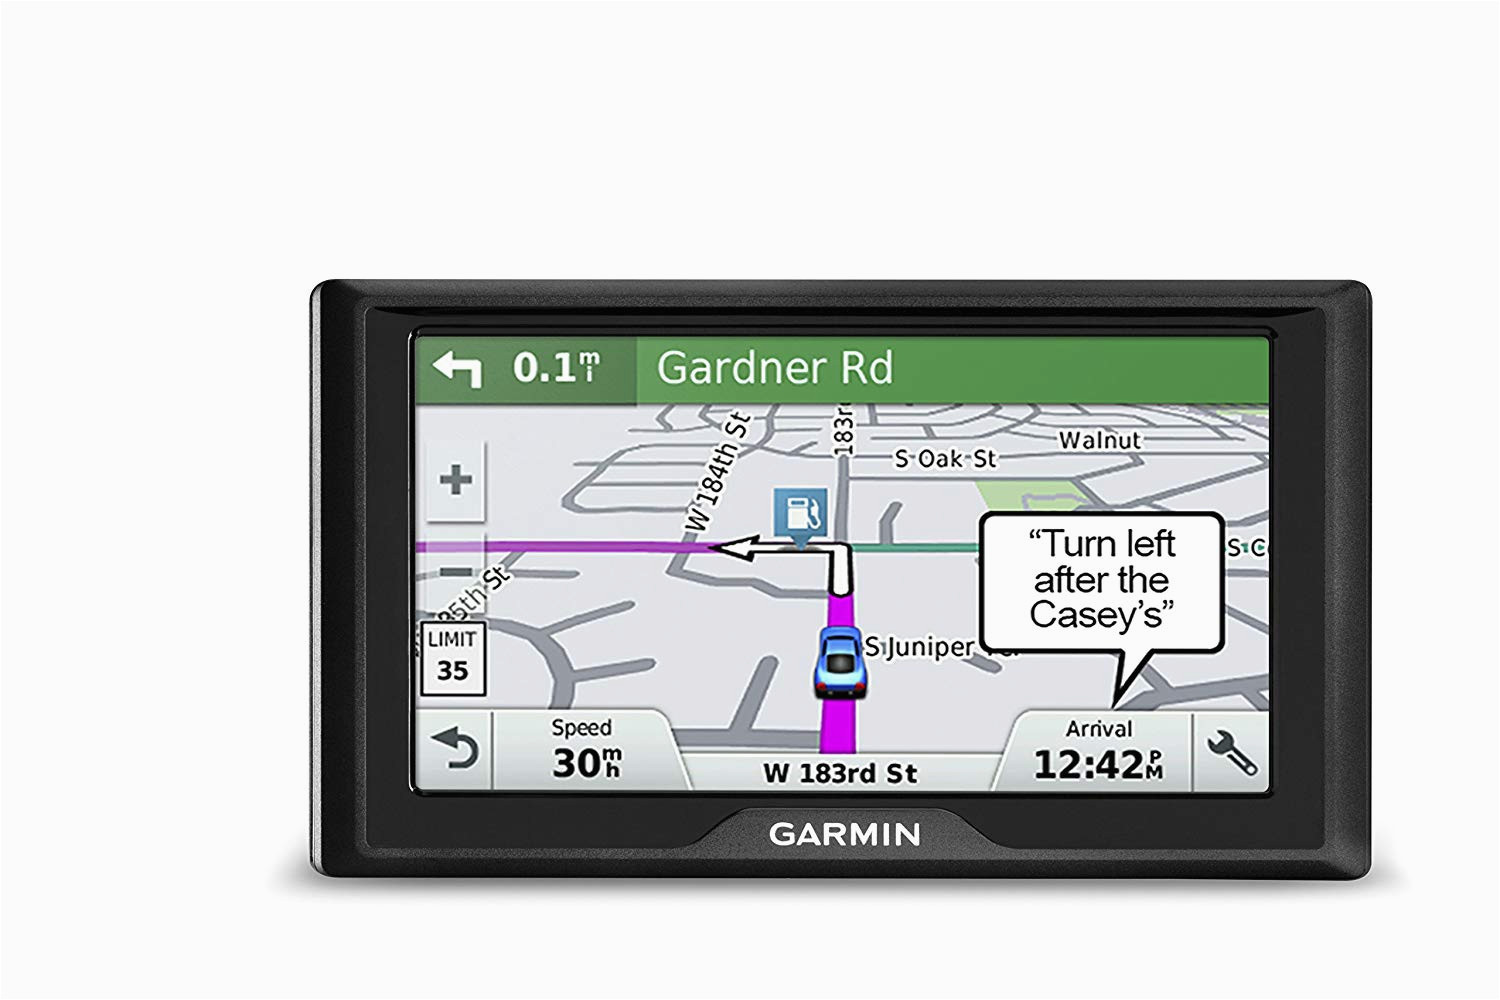 garmin drive 61 usa lmt s gps navigator system with lifetime maps live traffic and live parking driver alerts direct access tripadvisor and